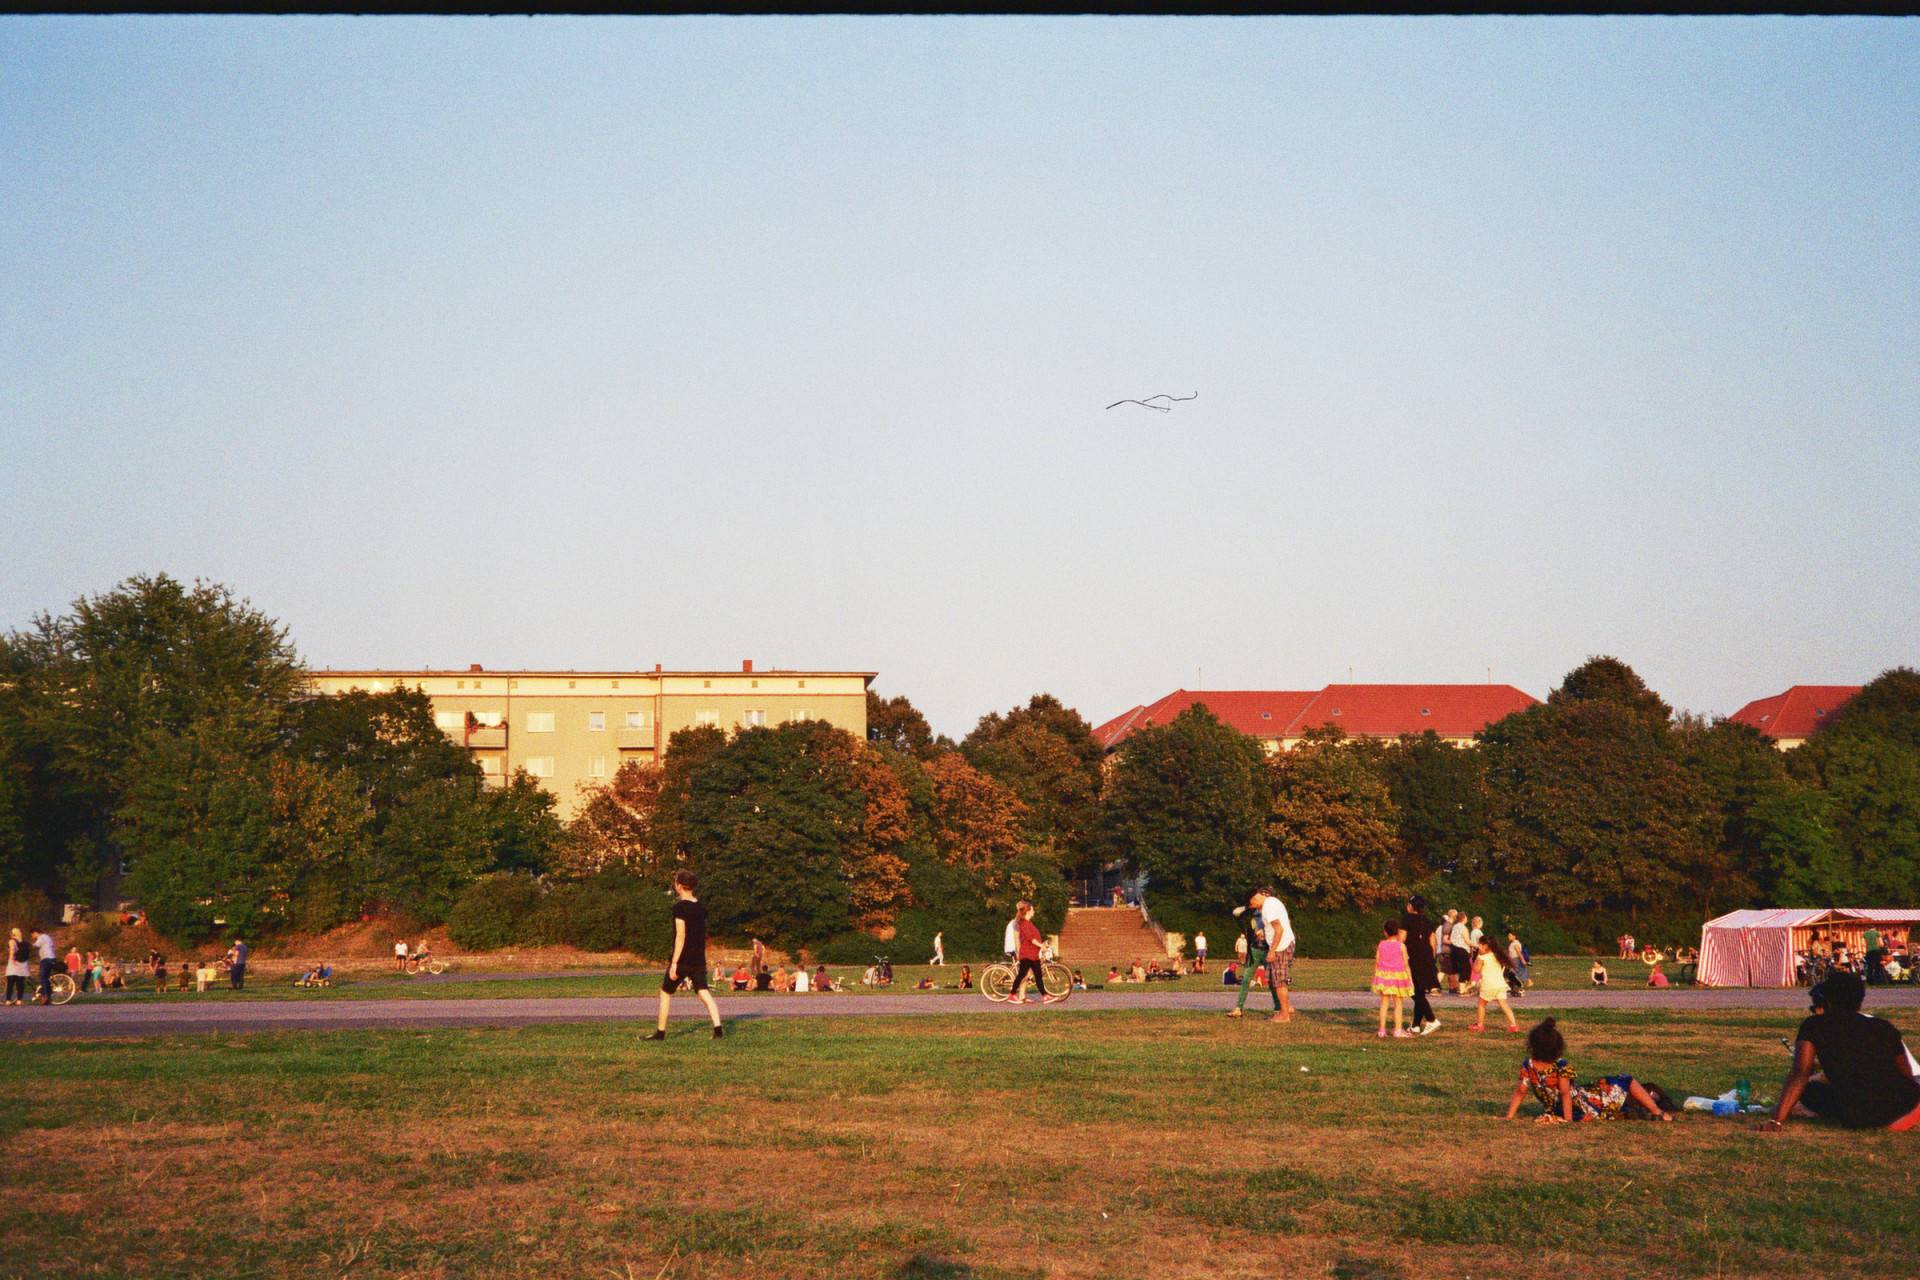 people hanging around in a park covered with grass and surrounded by trees under the clear blue sky